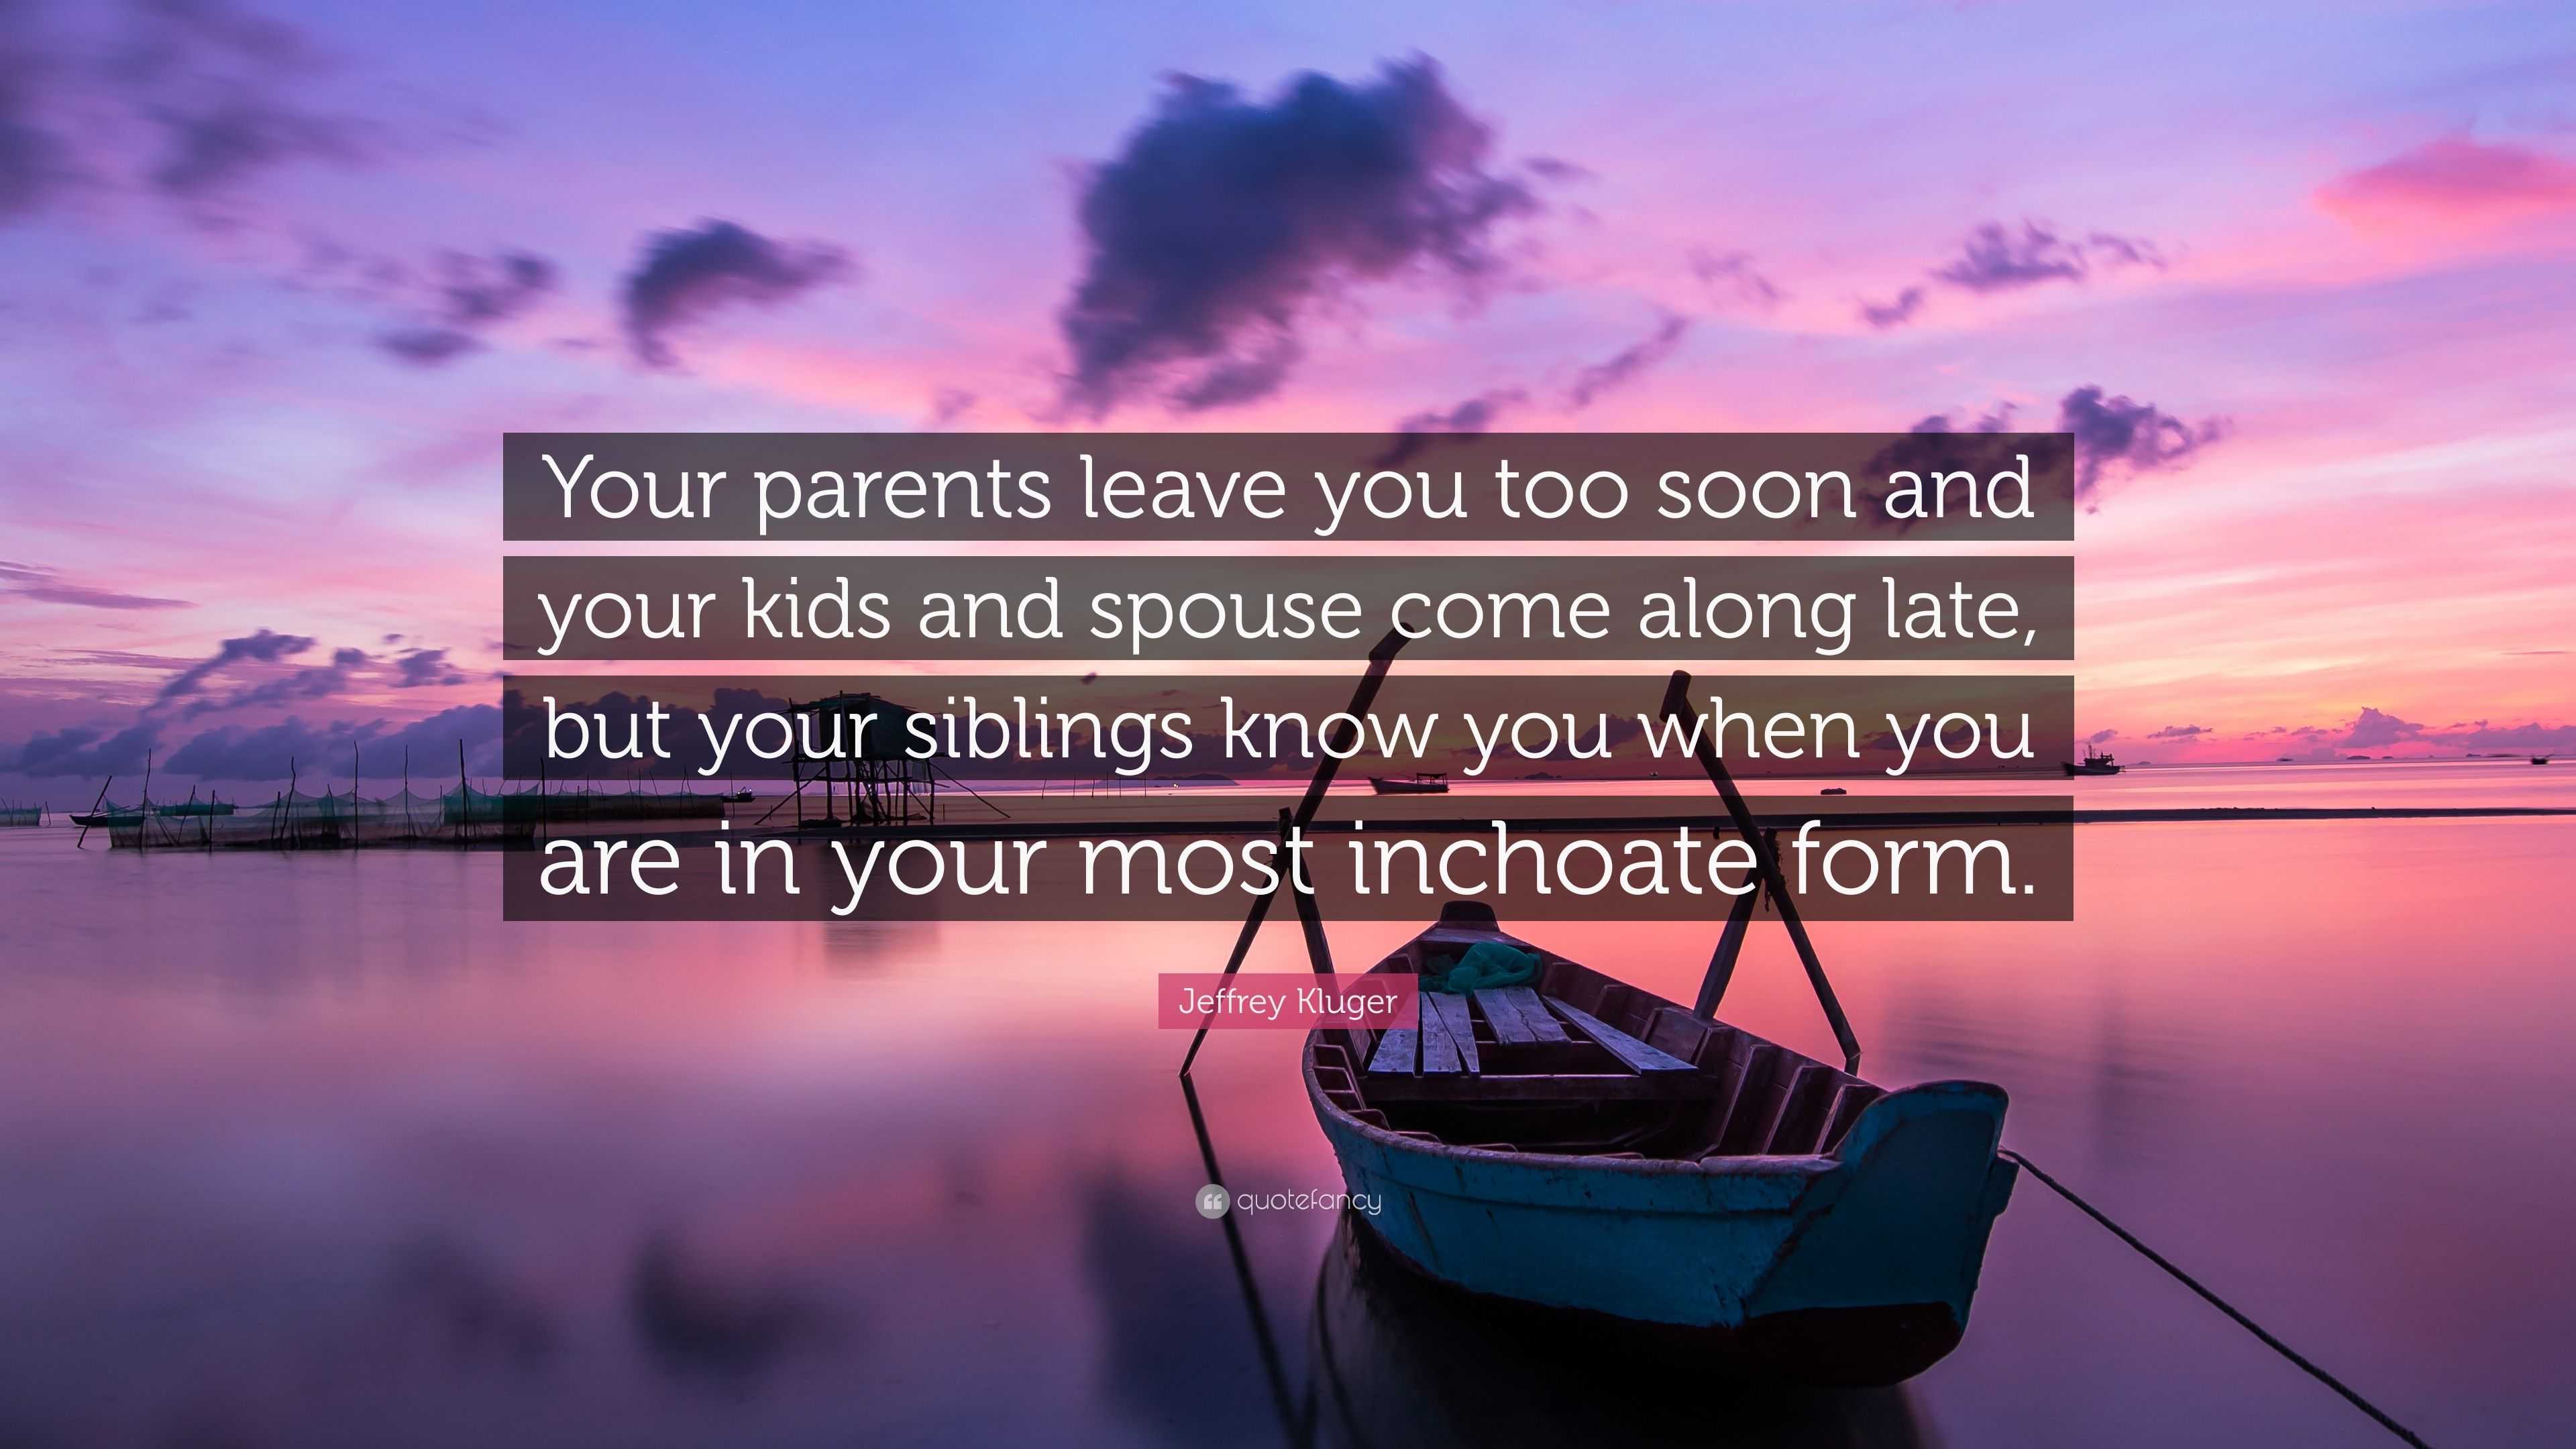 Jeffrey Kluger Quote: “Your parents leave you too soon and your kids